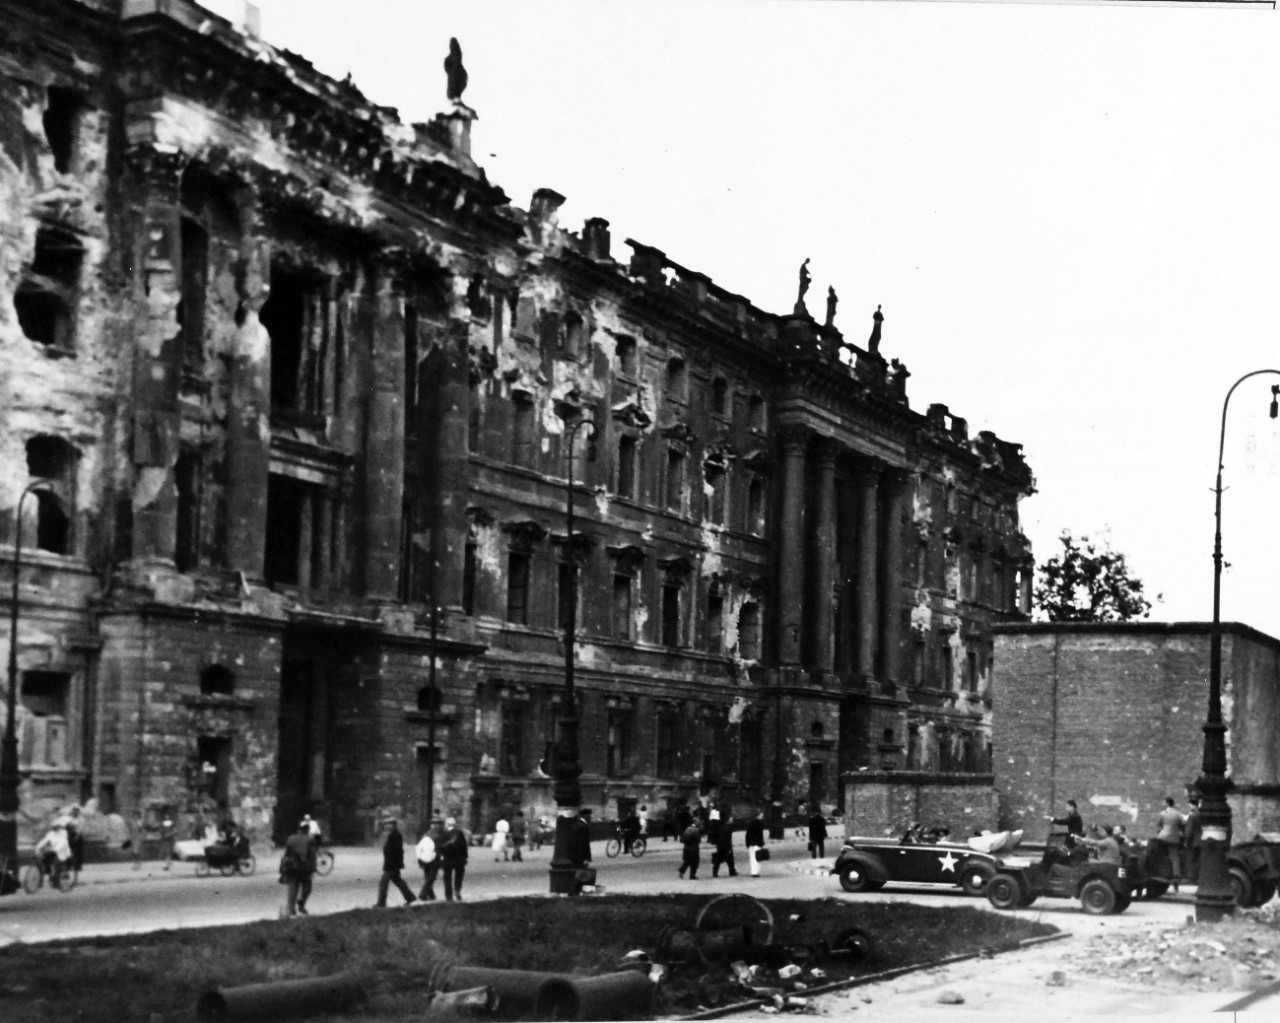 80-G-49991:  Potsdam Conference, 17 July – 2 August 1945. Berlin, Germany.  Note the bombed out building on the left.   The building maybe the Berliner Schloss or the Berlin city palace, residence of the Kasiers prior to abdication in 1919.   Photographed by CPhoM William Belknap, Jr. and received July 16, 1945. U.S. Navy Photograph, now in the collections of the National Archives.  (2016/02/23).